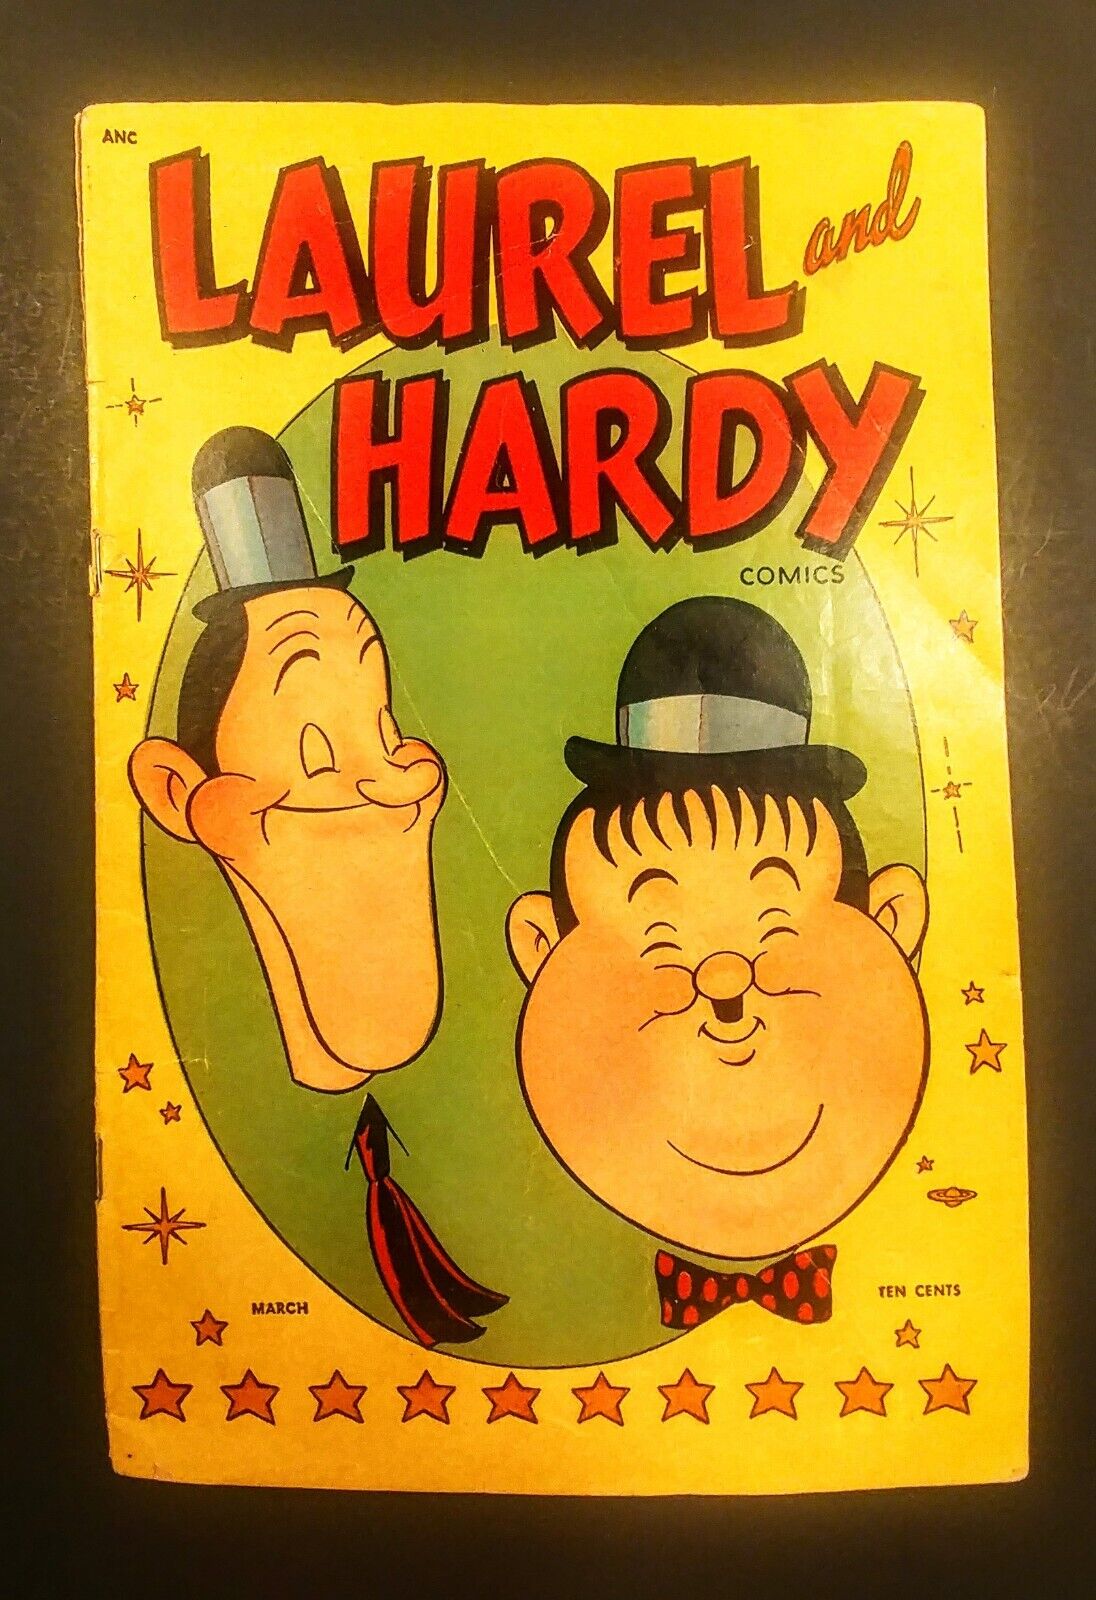 LAUREL AND HARDY NO. 1 1949. VERY GOOD/FINE CONDITION.